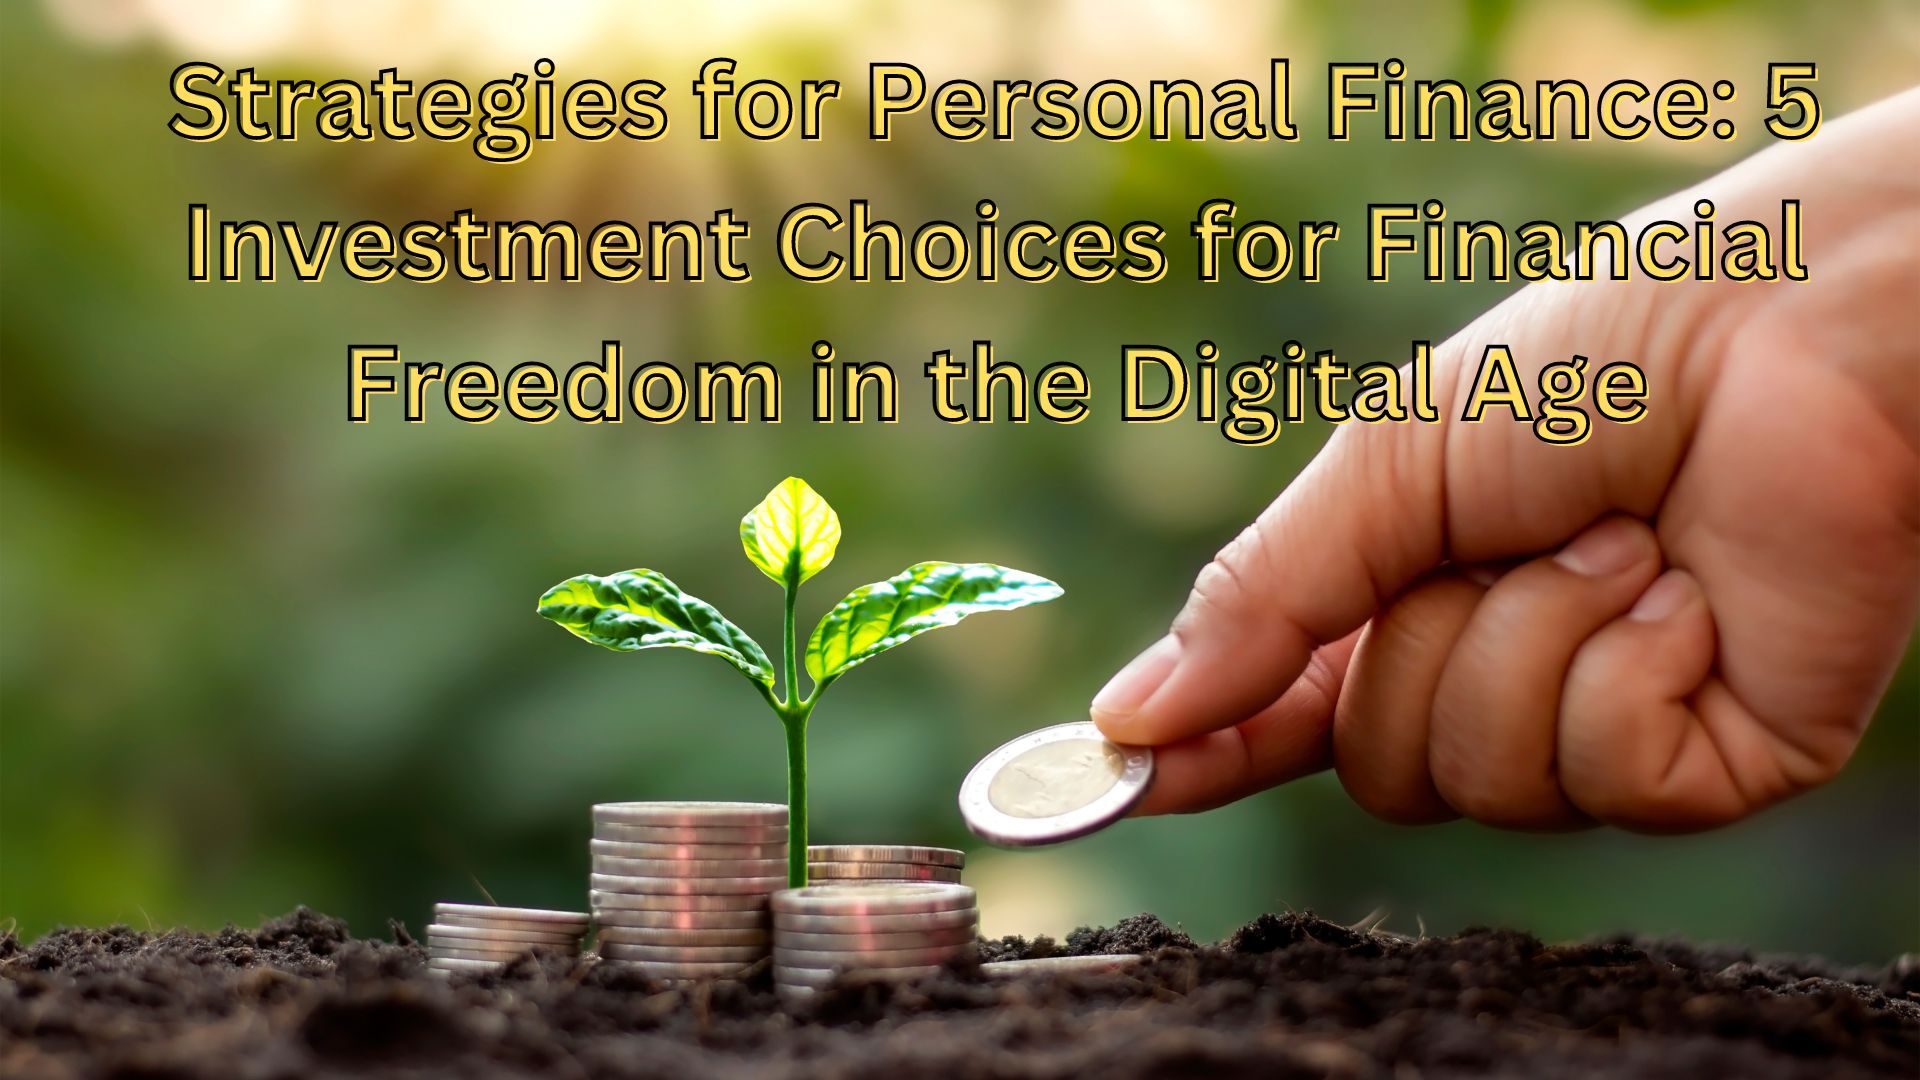 Strategies for Personal Finance: 5 Investment Choices for Financial Freedom in the Digital Age